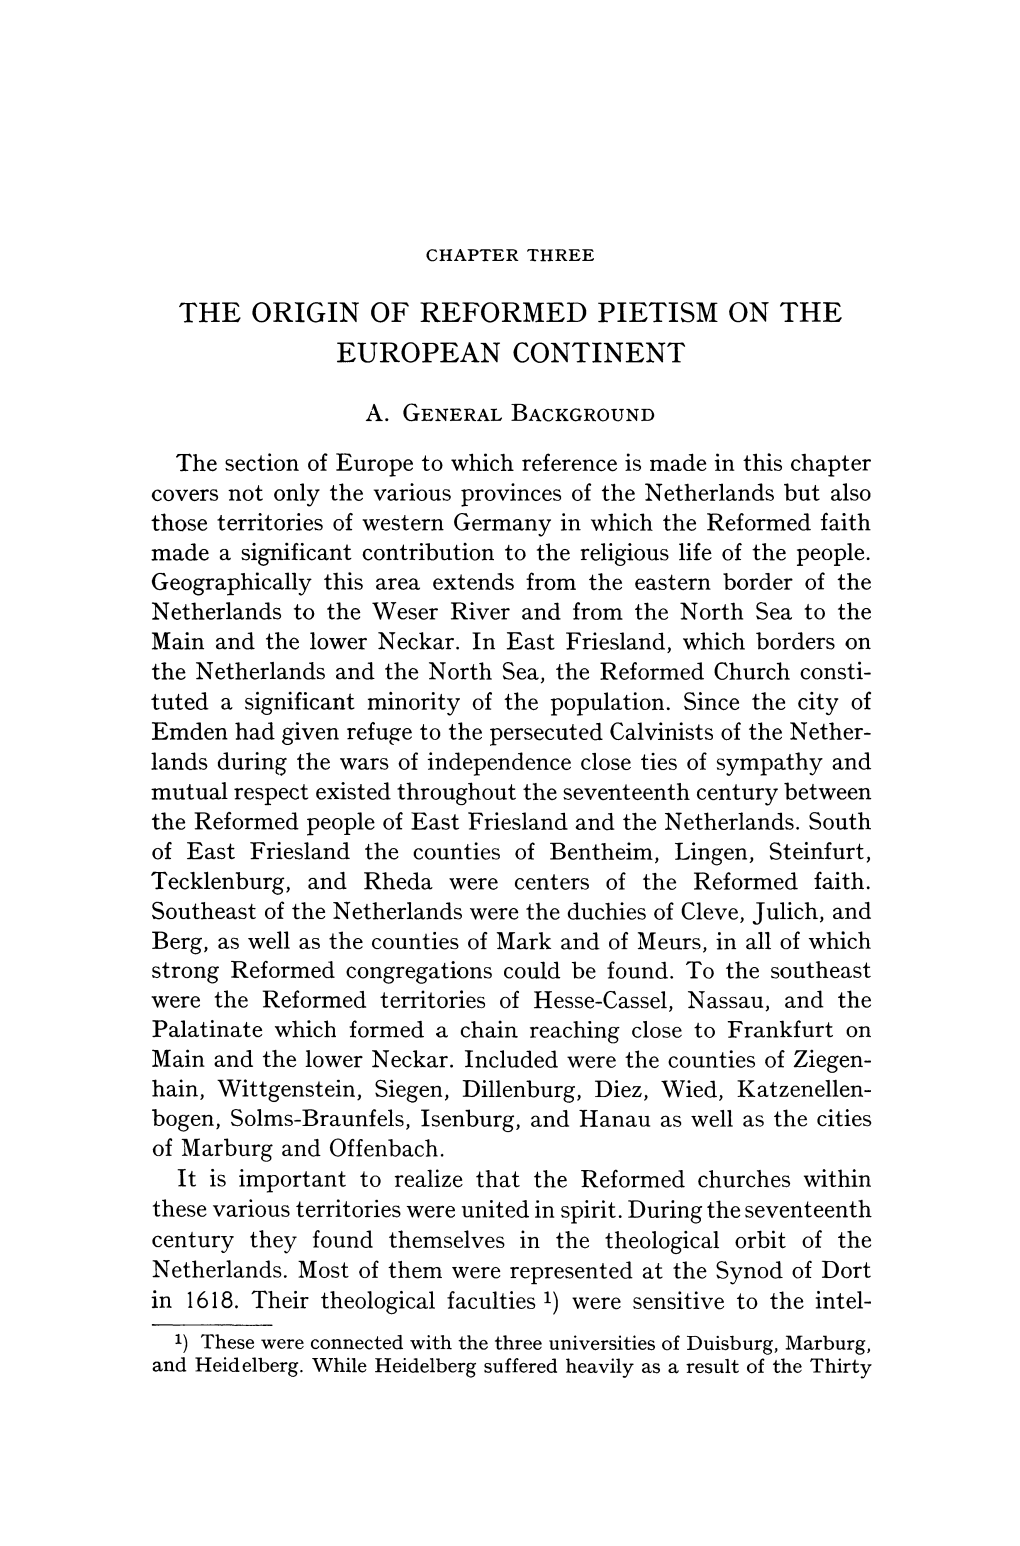 The Origin of Reformed Pietism on the European Continent